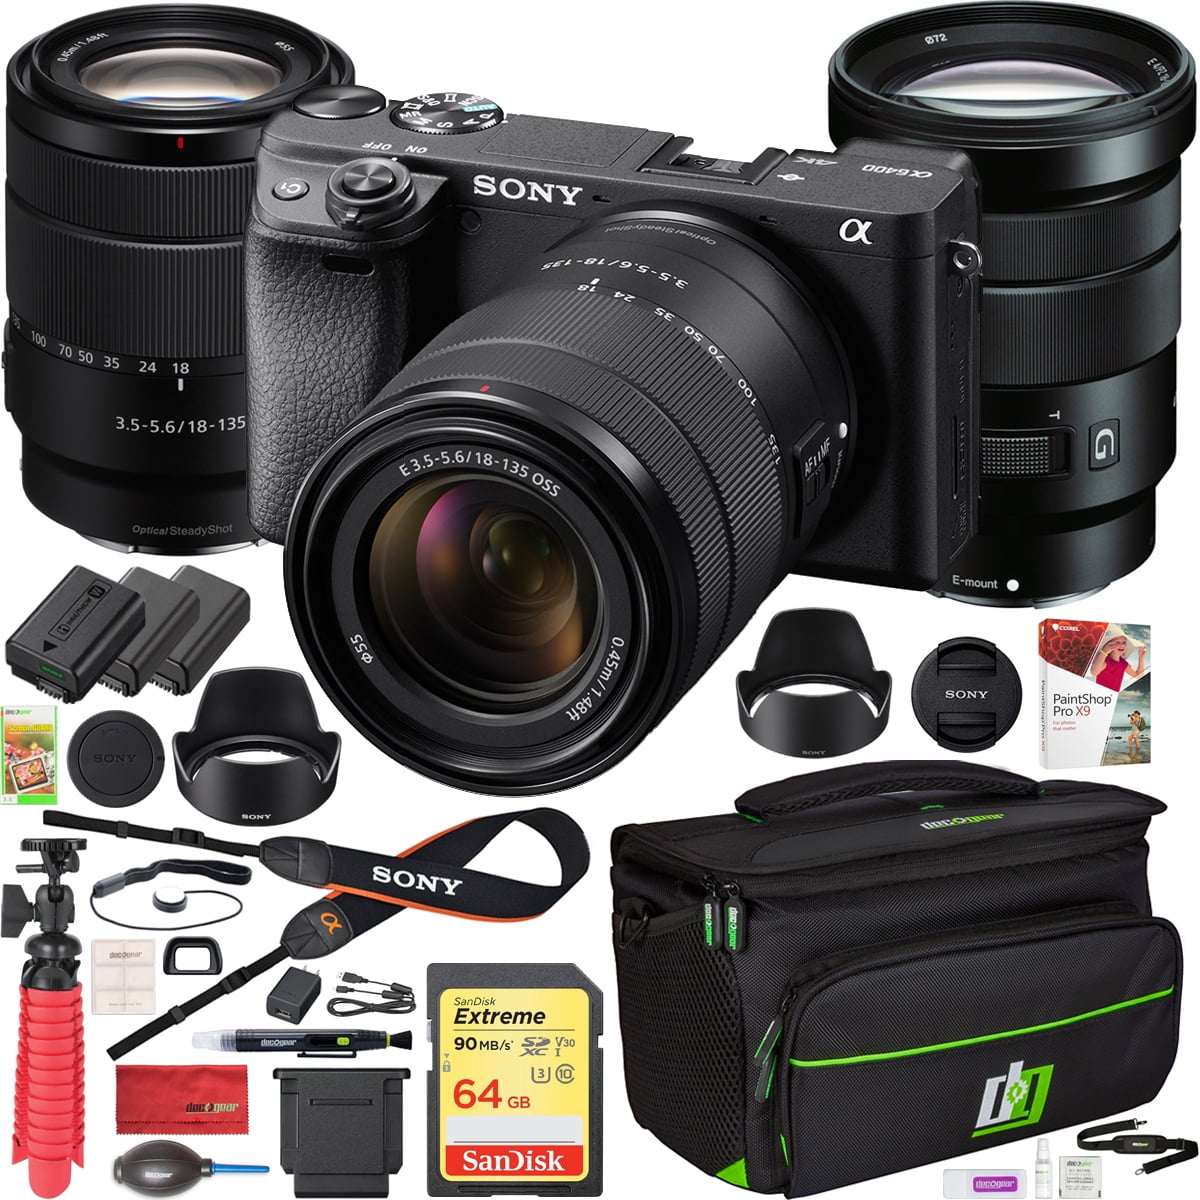 Sony A6400 4k Mirrorless Camera Ilce 6400m B With 18 135mm F3 5 5 6 And 18 105 Mm F4 G Oss Lens 2 Lens Kit And Deco Gear Travel Case Photography Maintenace Set 2x Extra Battery Essential Bundle